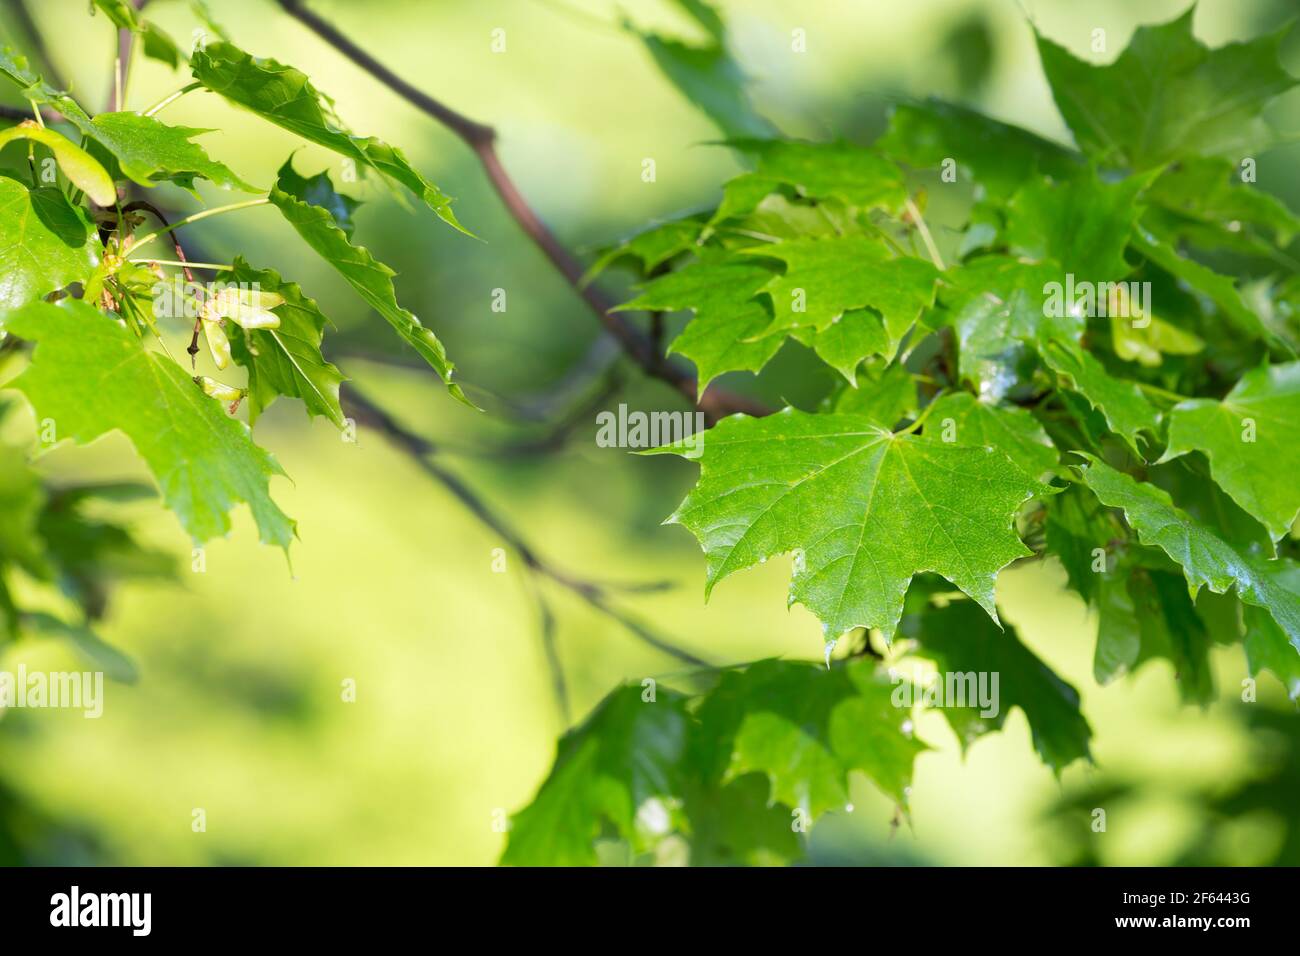 Page 6 Norway Maple Tree High Resolution Stock Photography And Images Alamy